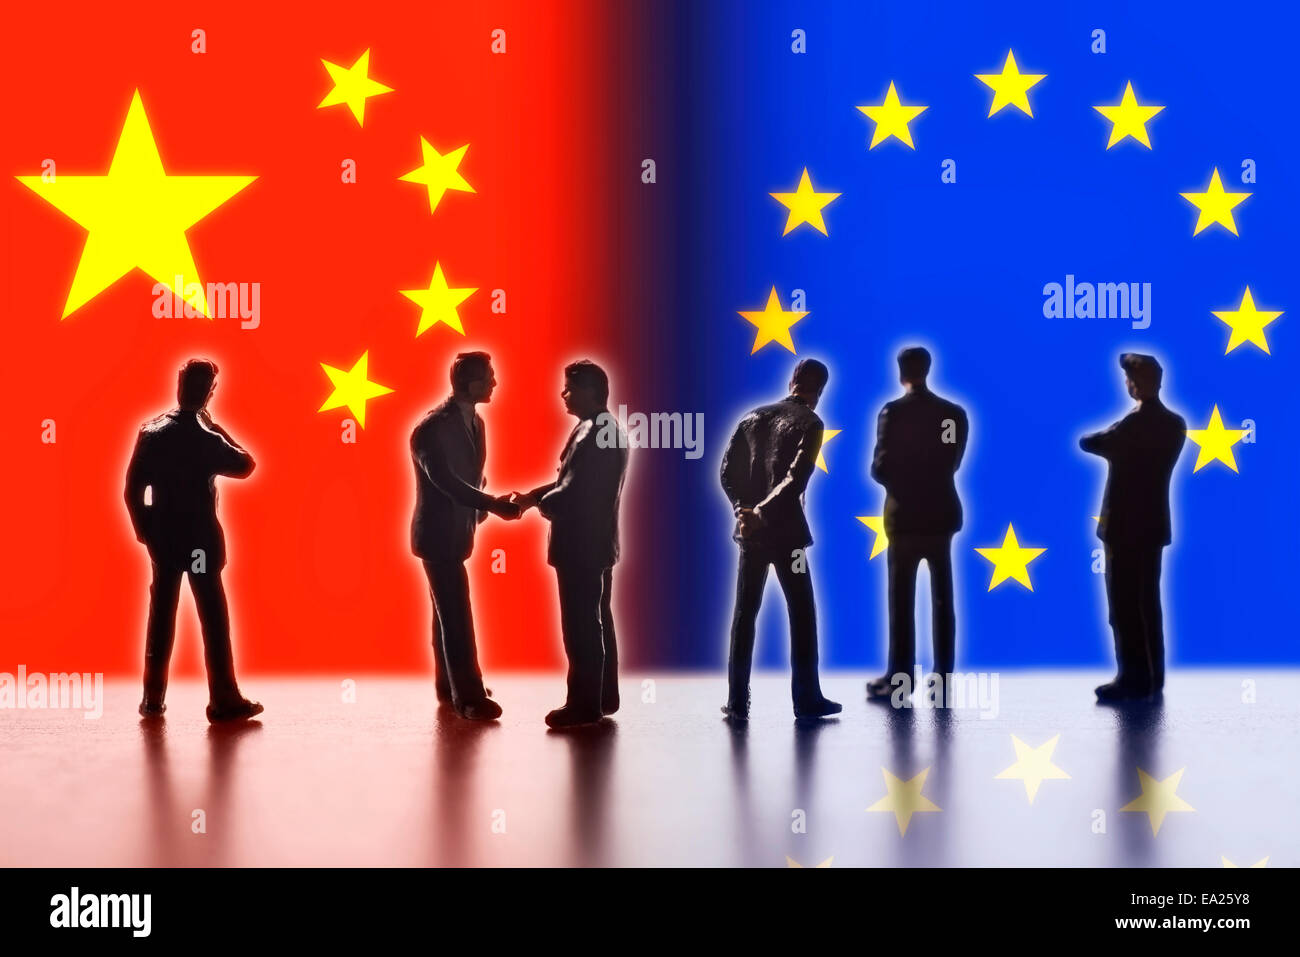 Model figures symbolizing politicians are facing the flags of China and the EU. Two of them shake hands. Stock Photo